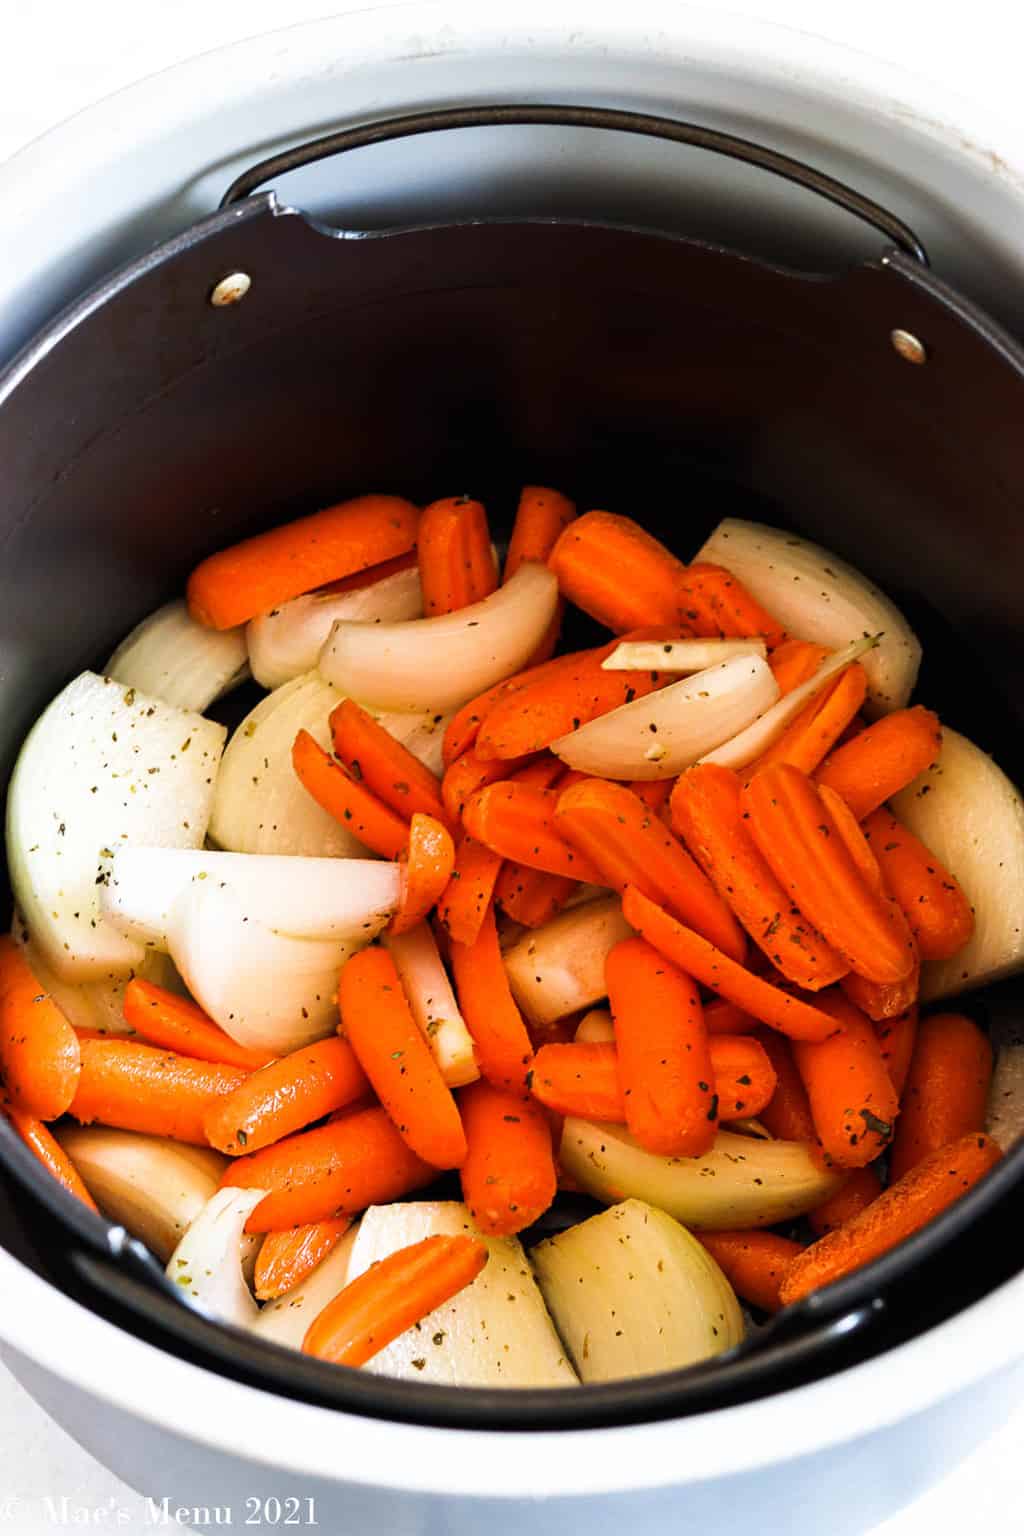 Carrots and onions in an air fryer basket